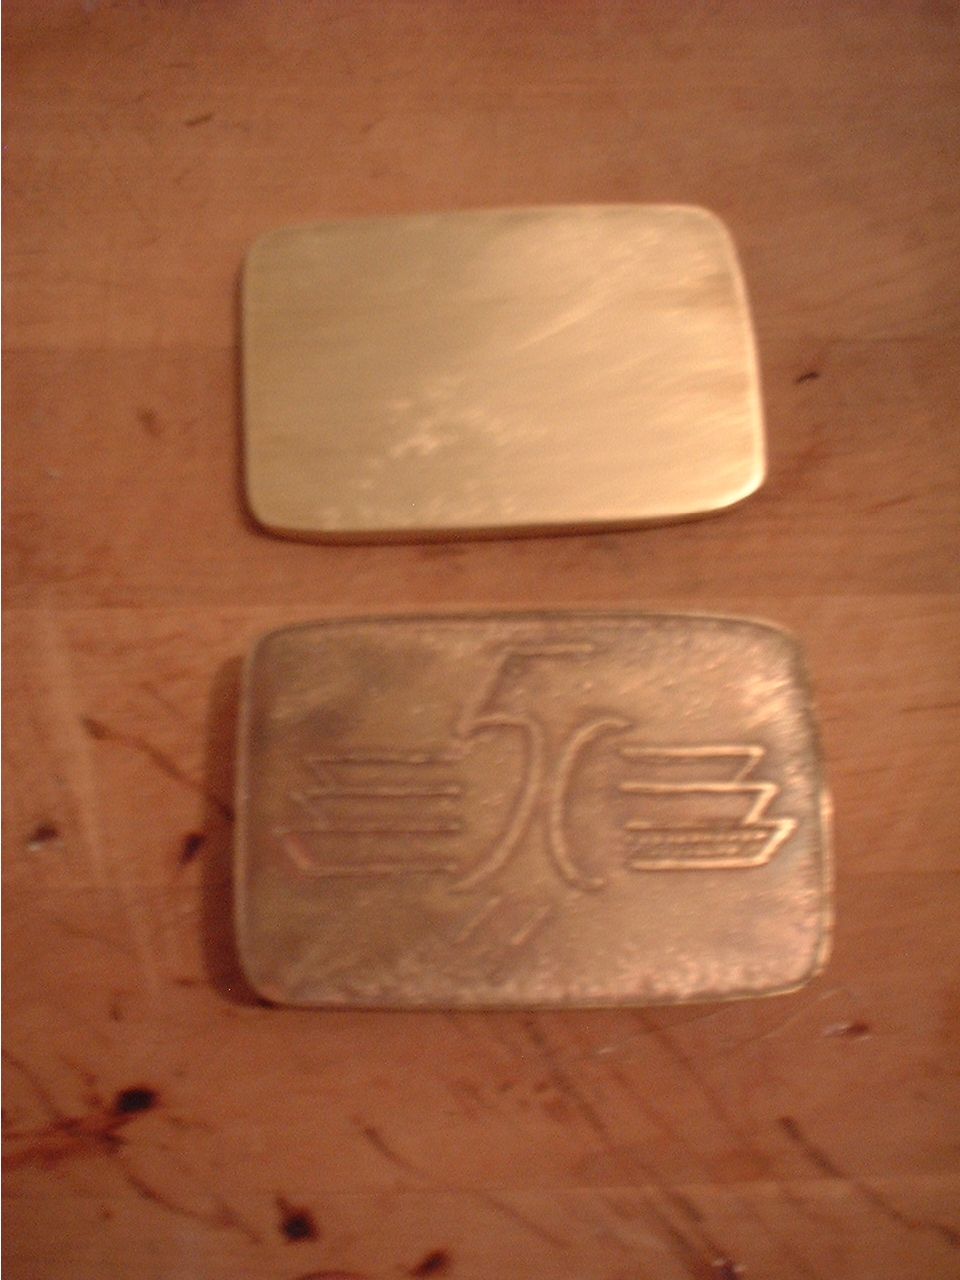 A polished buckle blank and one already etched.